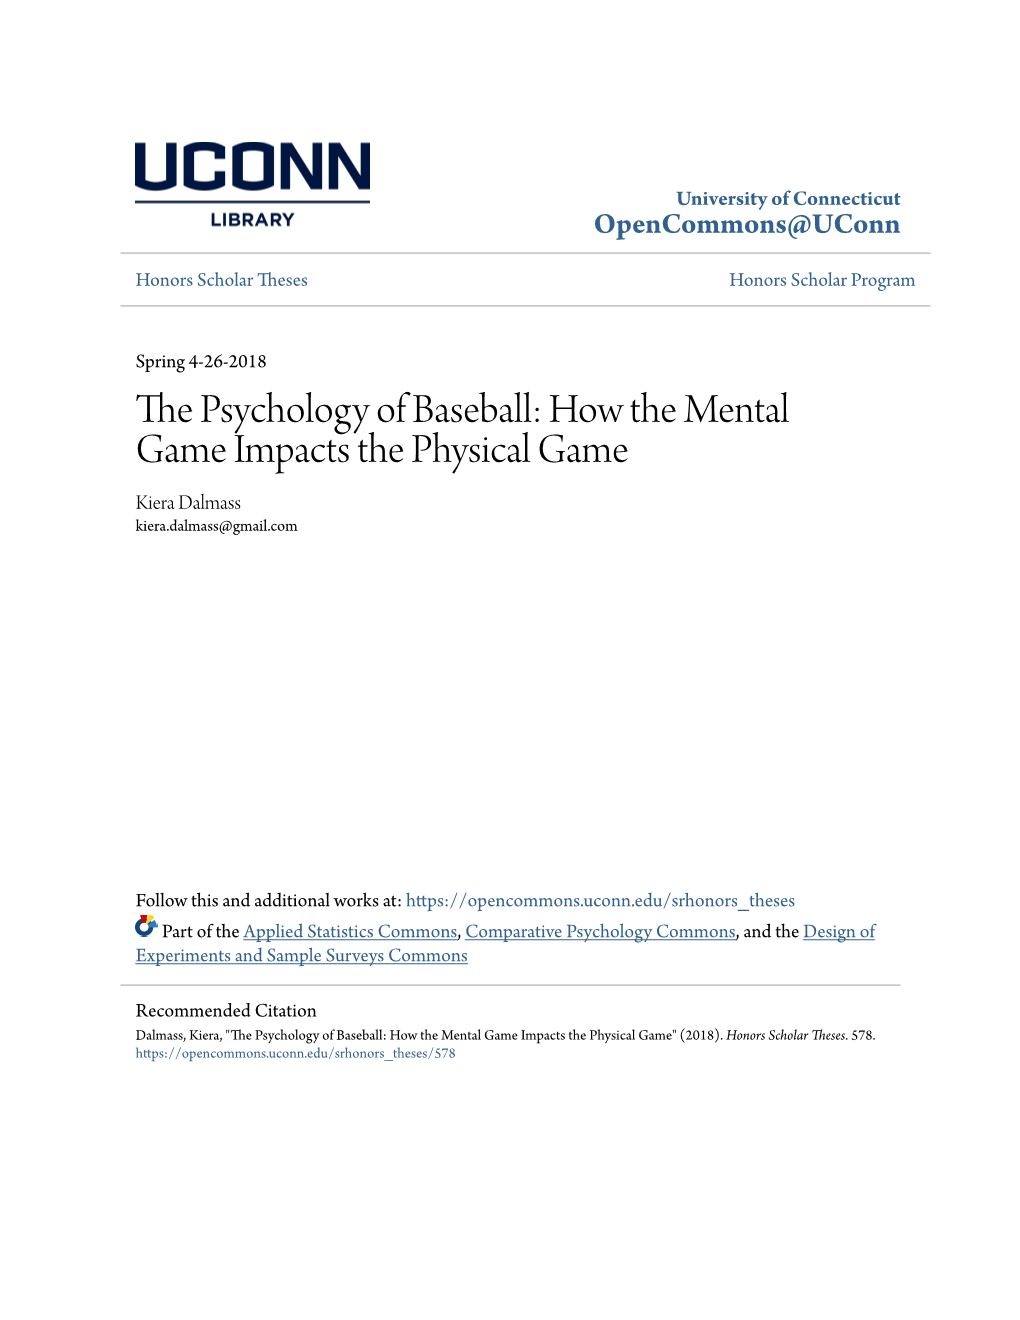 The Psychology of Baseball: How the Mental Game Impacts the Physical Game